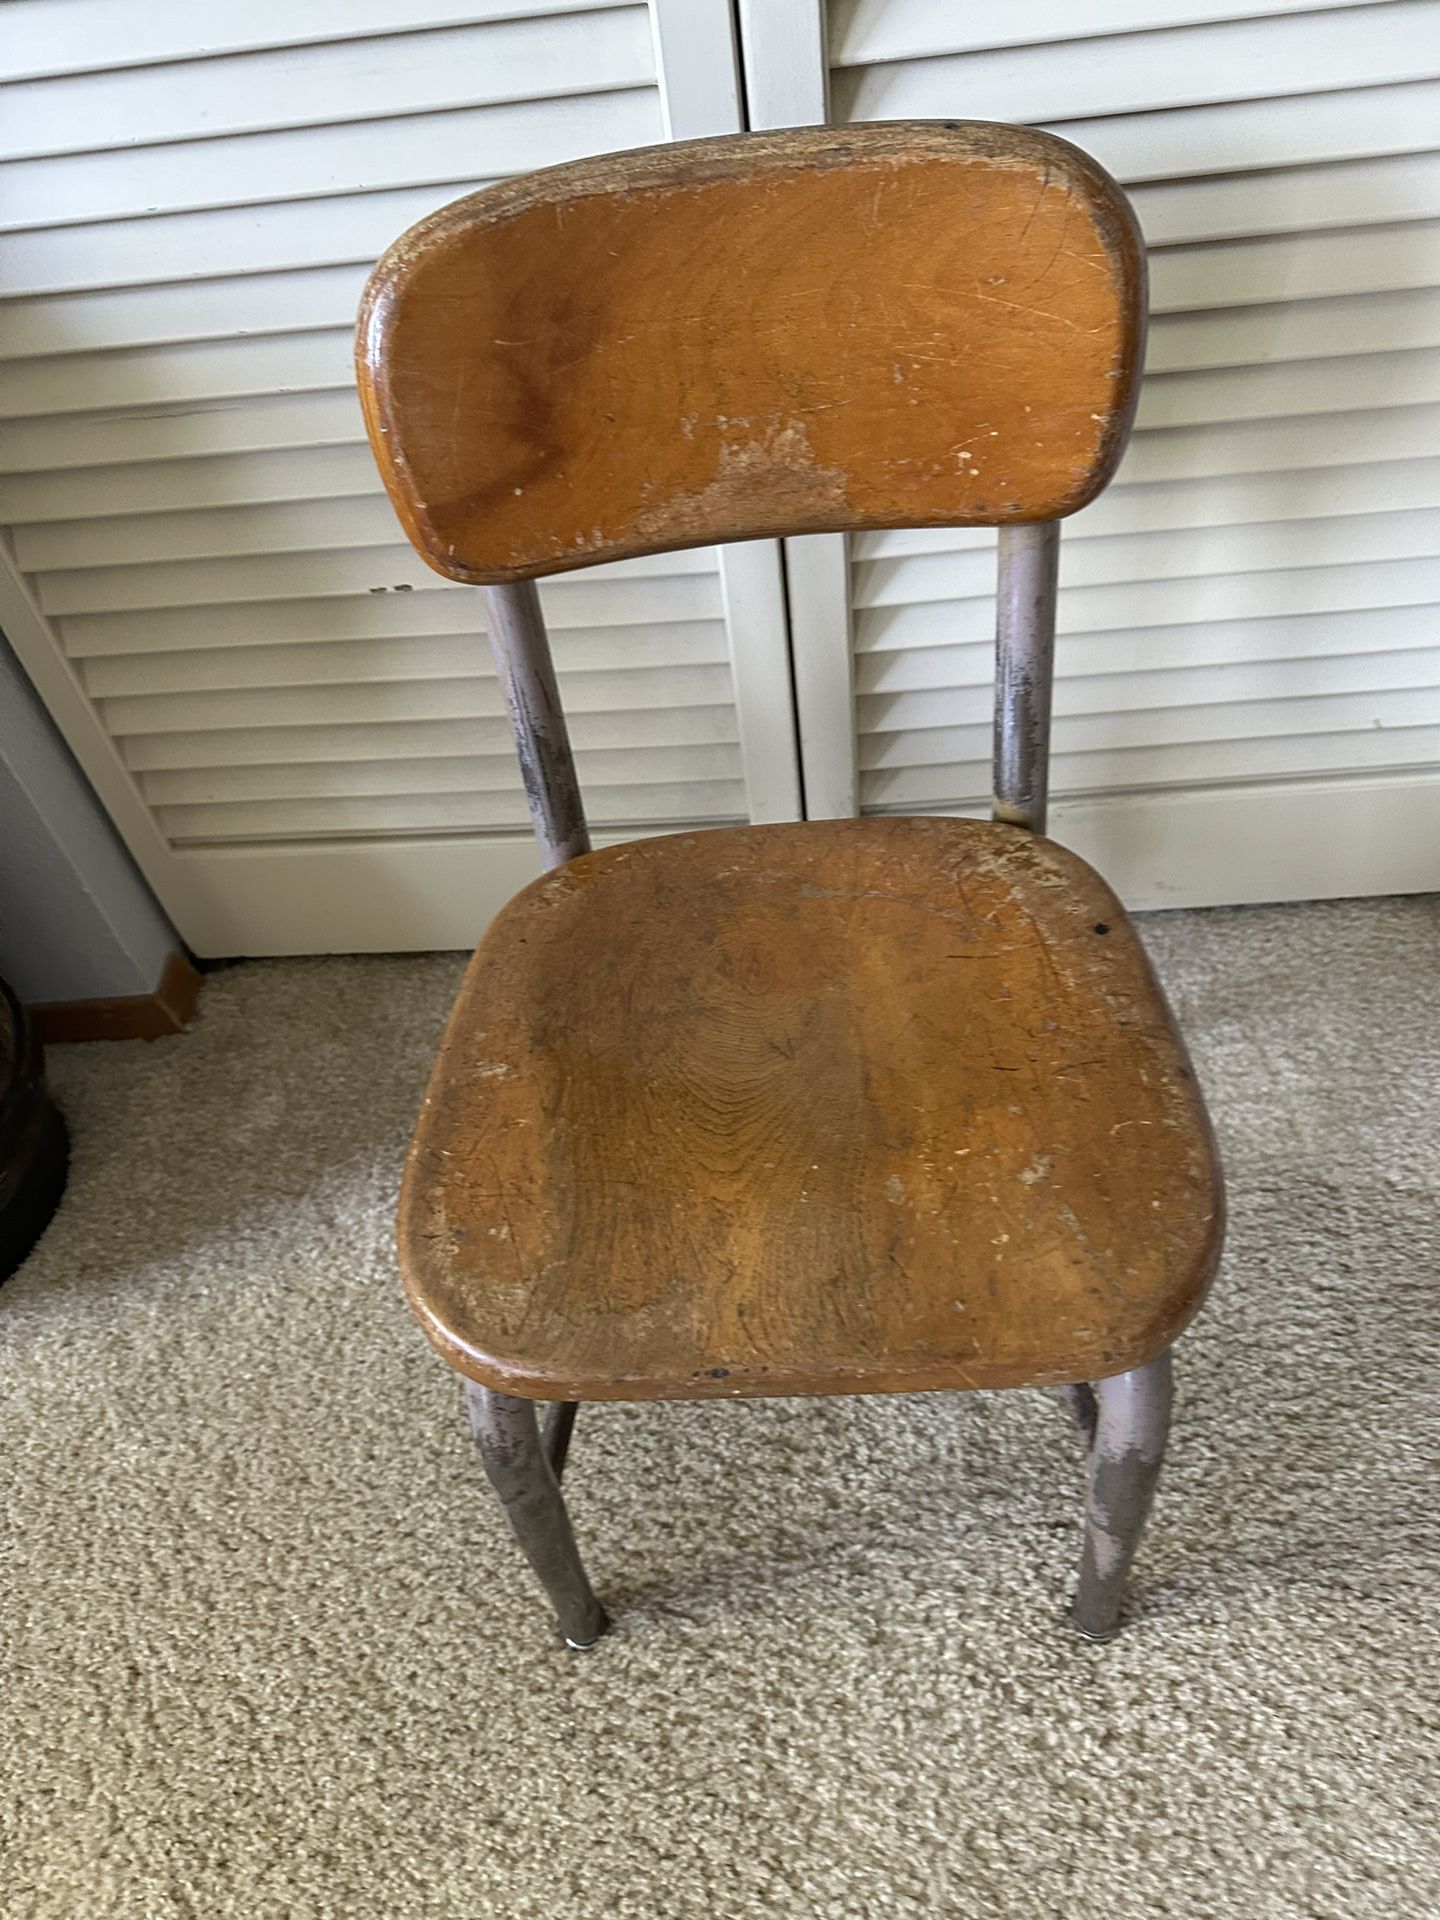 Small Child Chair